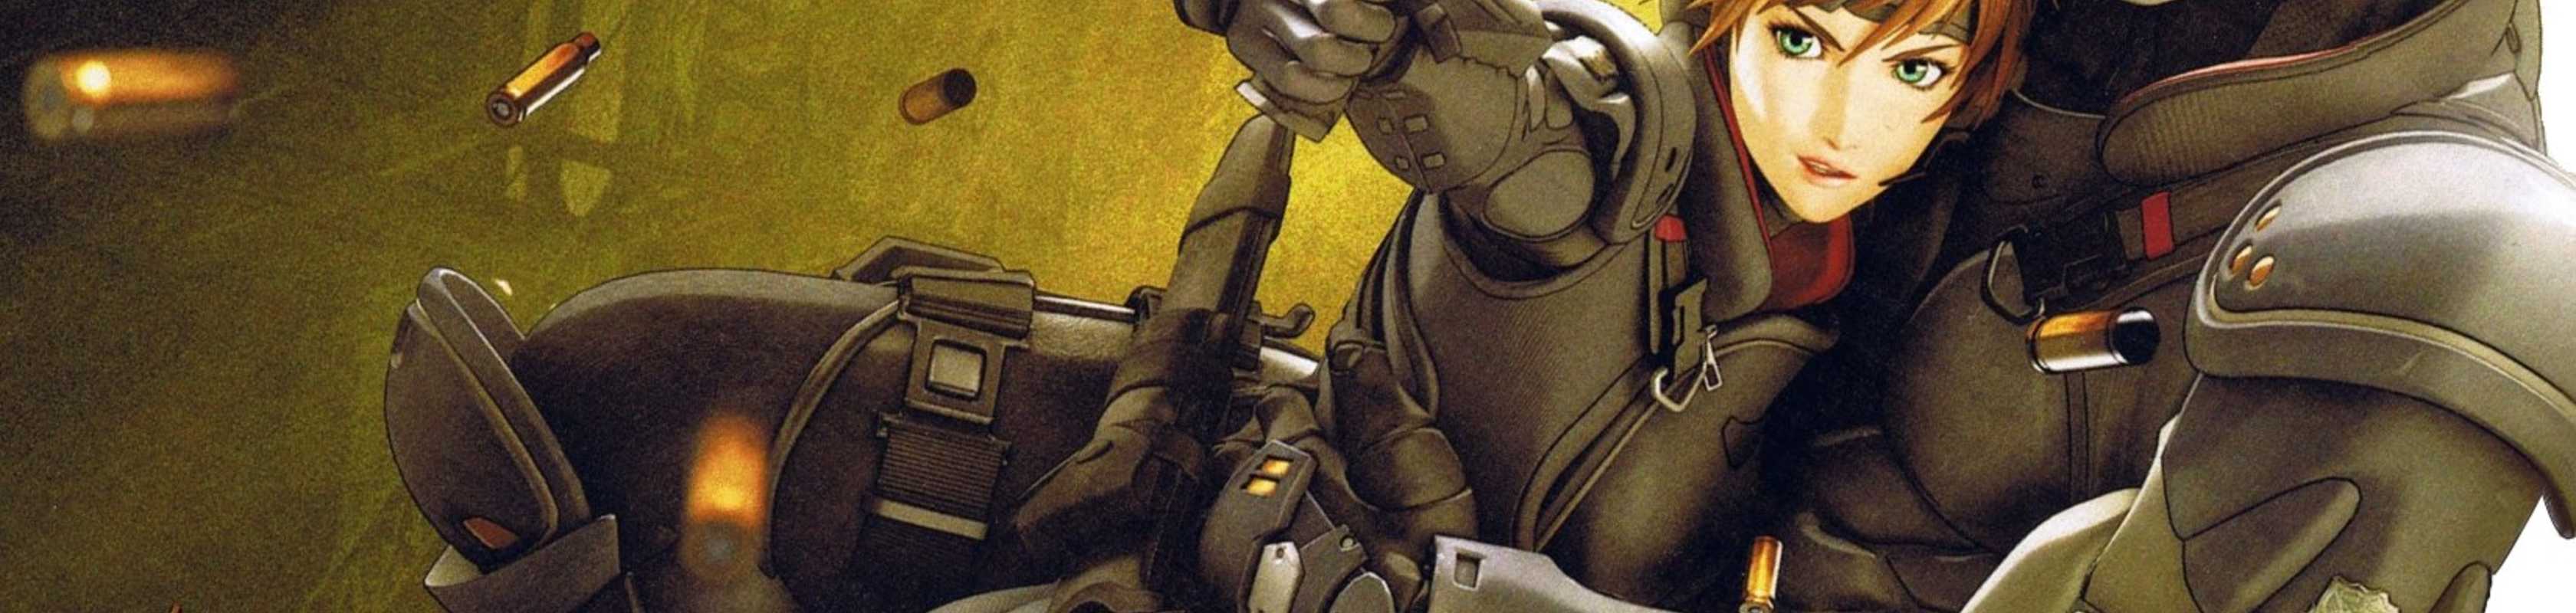 Appleseed (Movie) cover